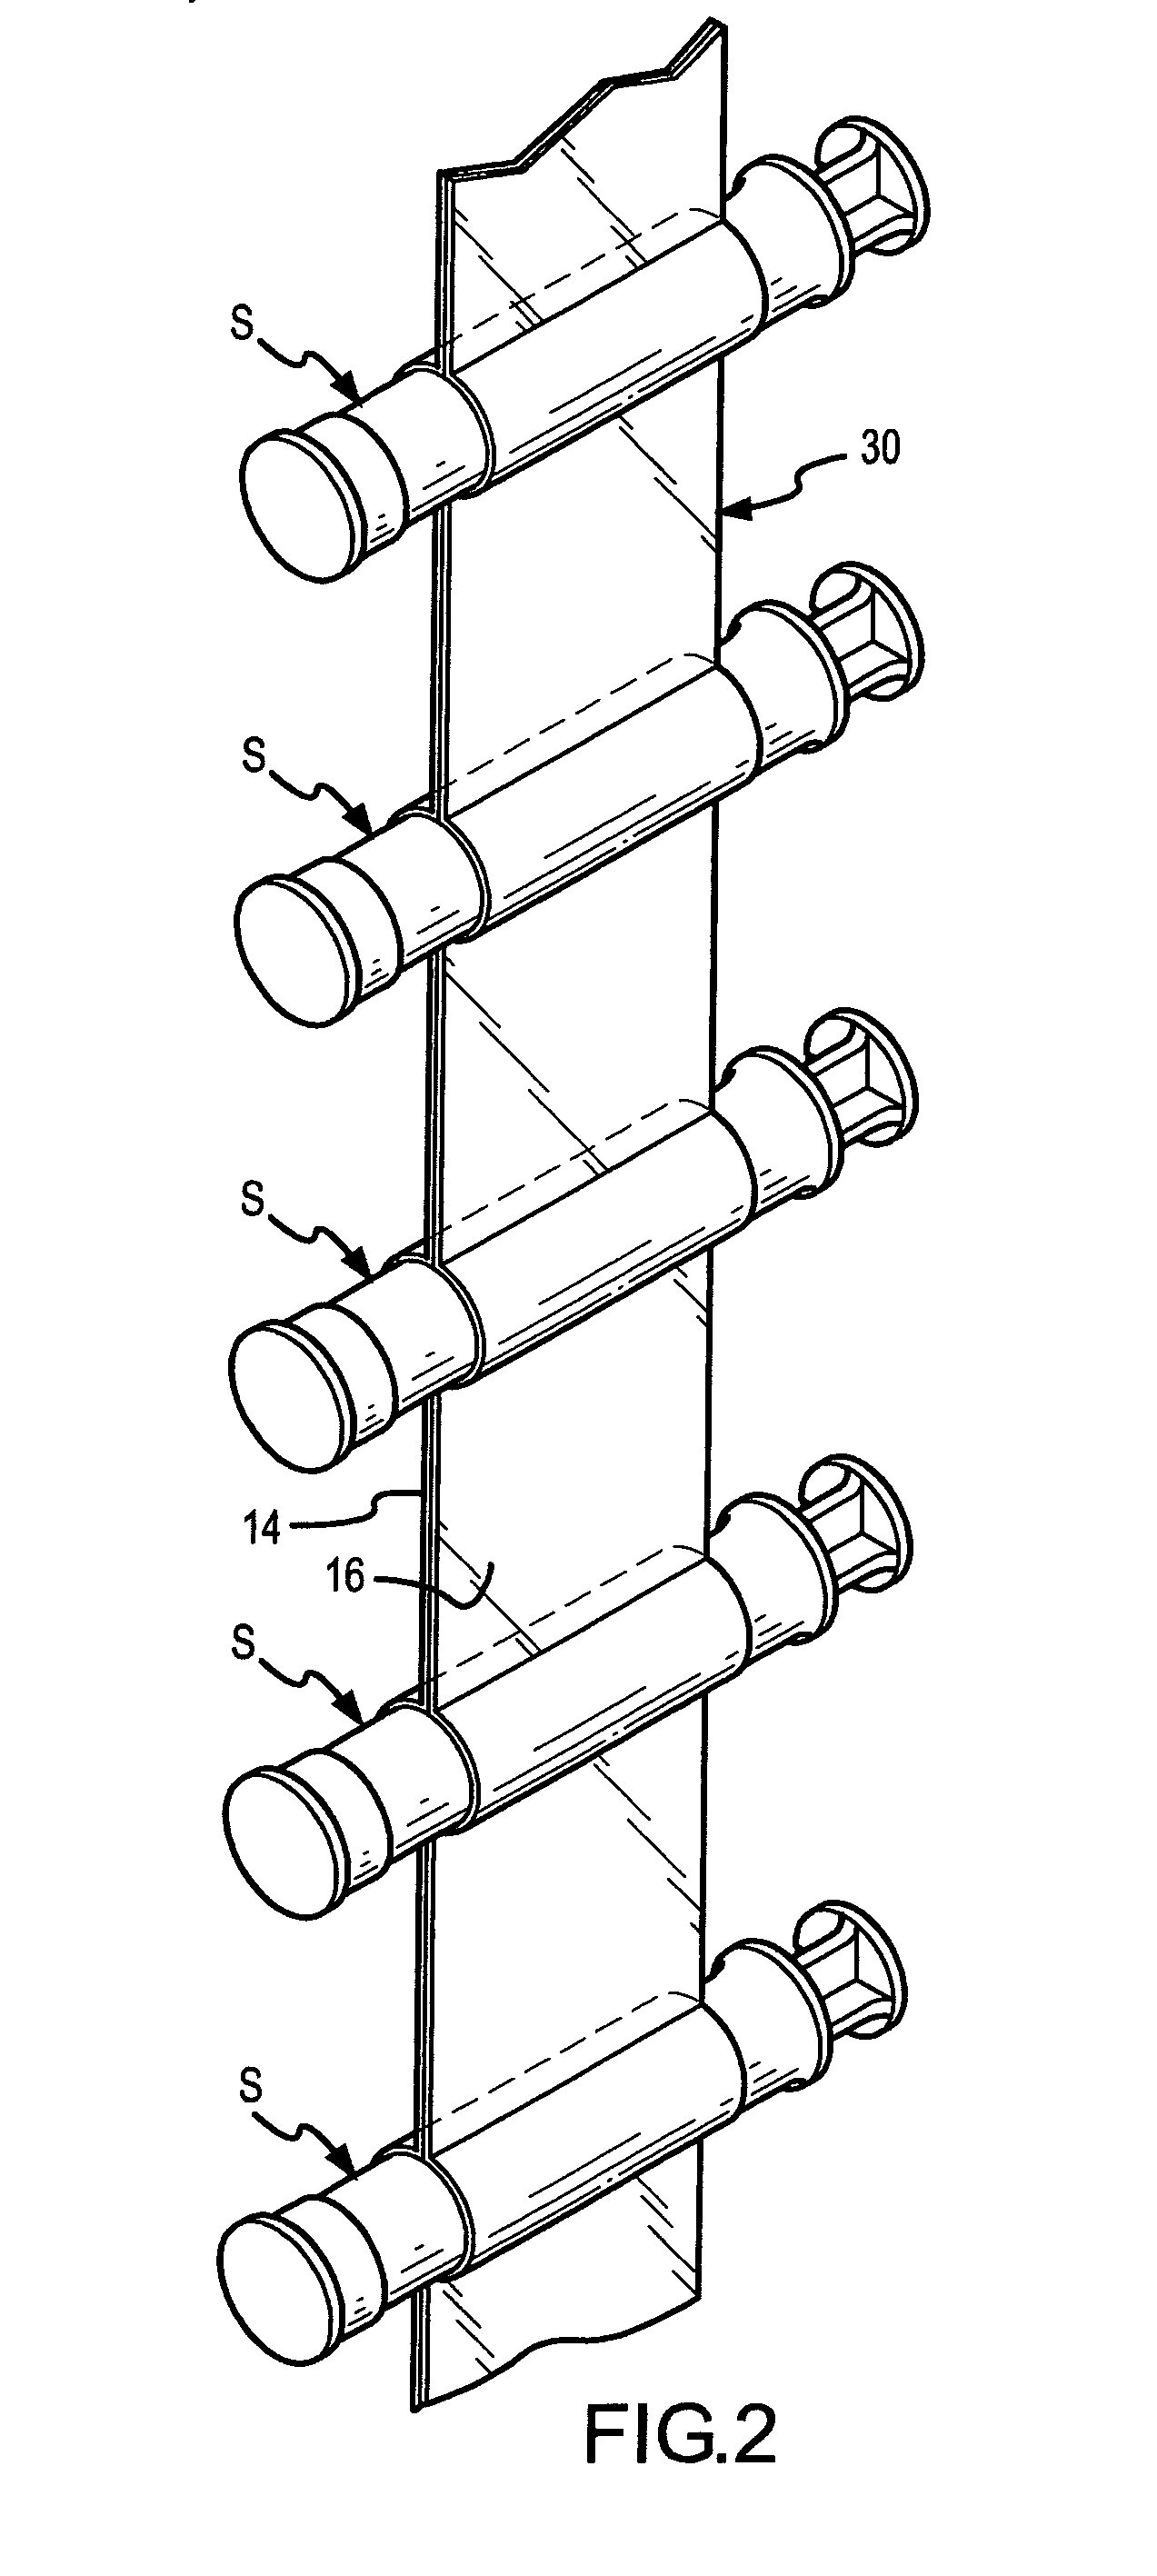 Method, system, and apparatus for handling, labeling, filling and capping syringes